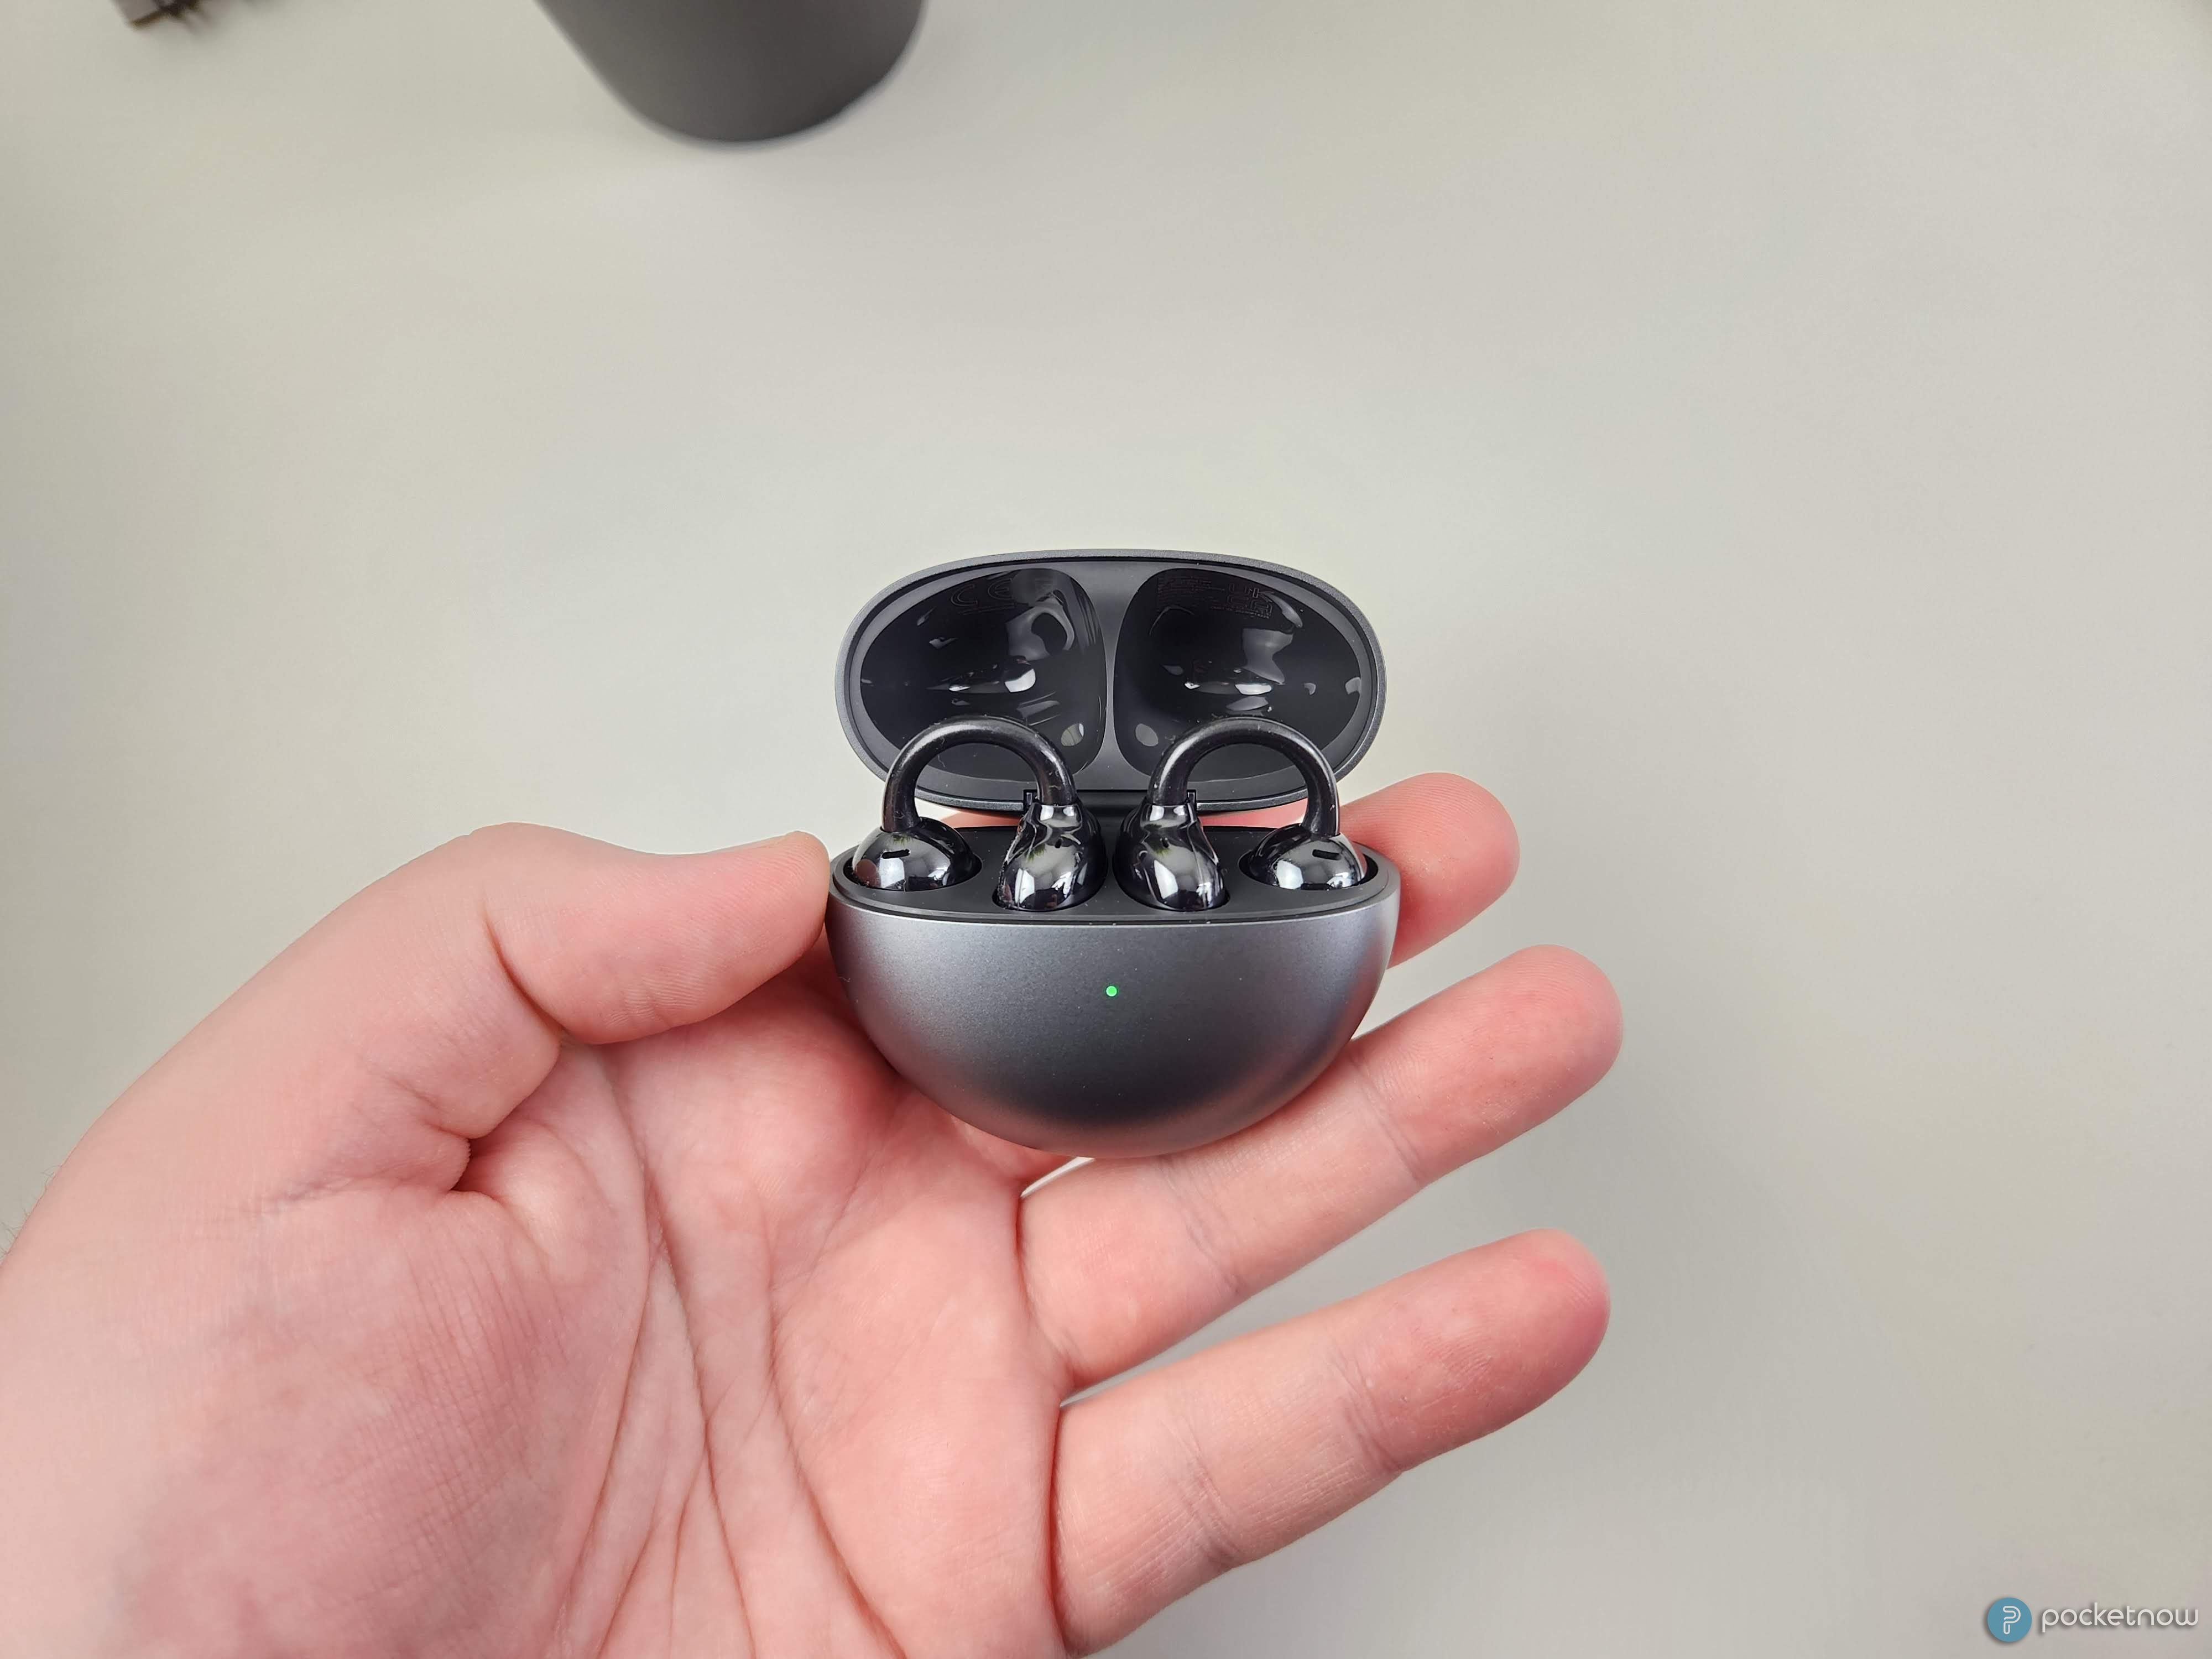 Huawei FreeClip: A Unique Take on Open-Ear Earbuds - My Site